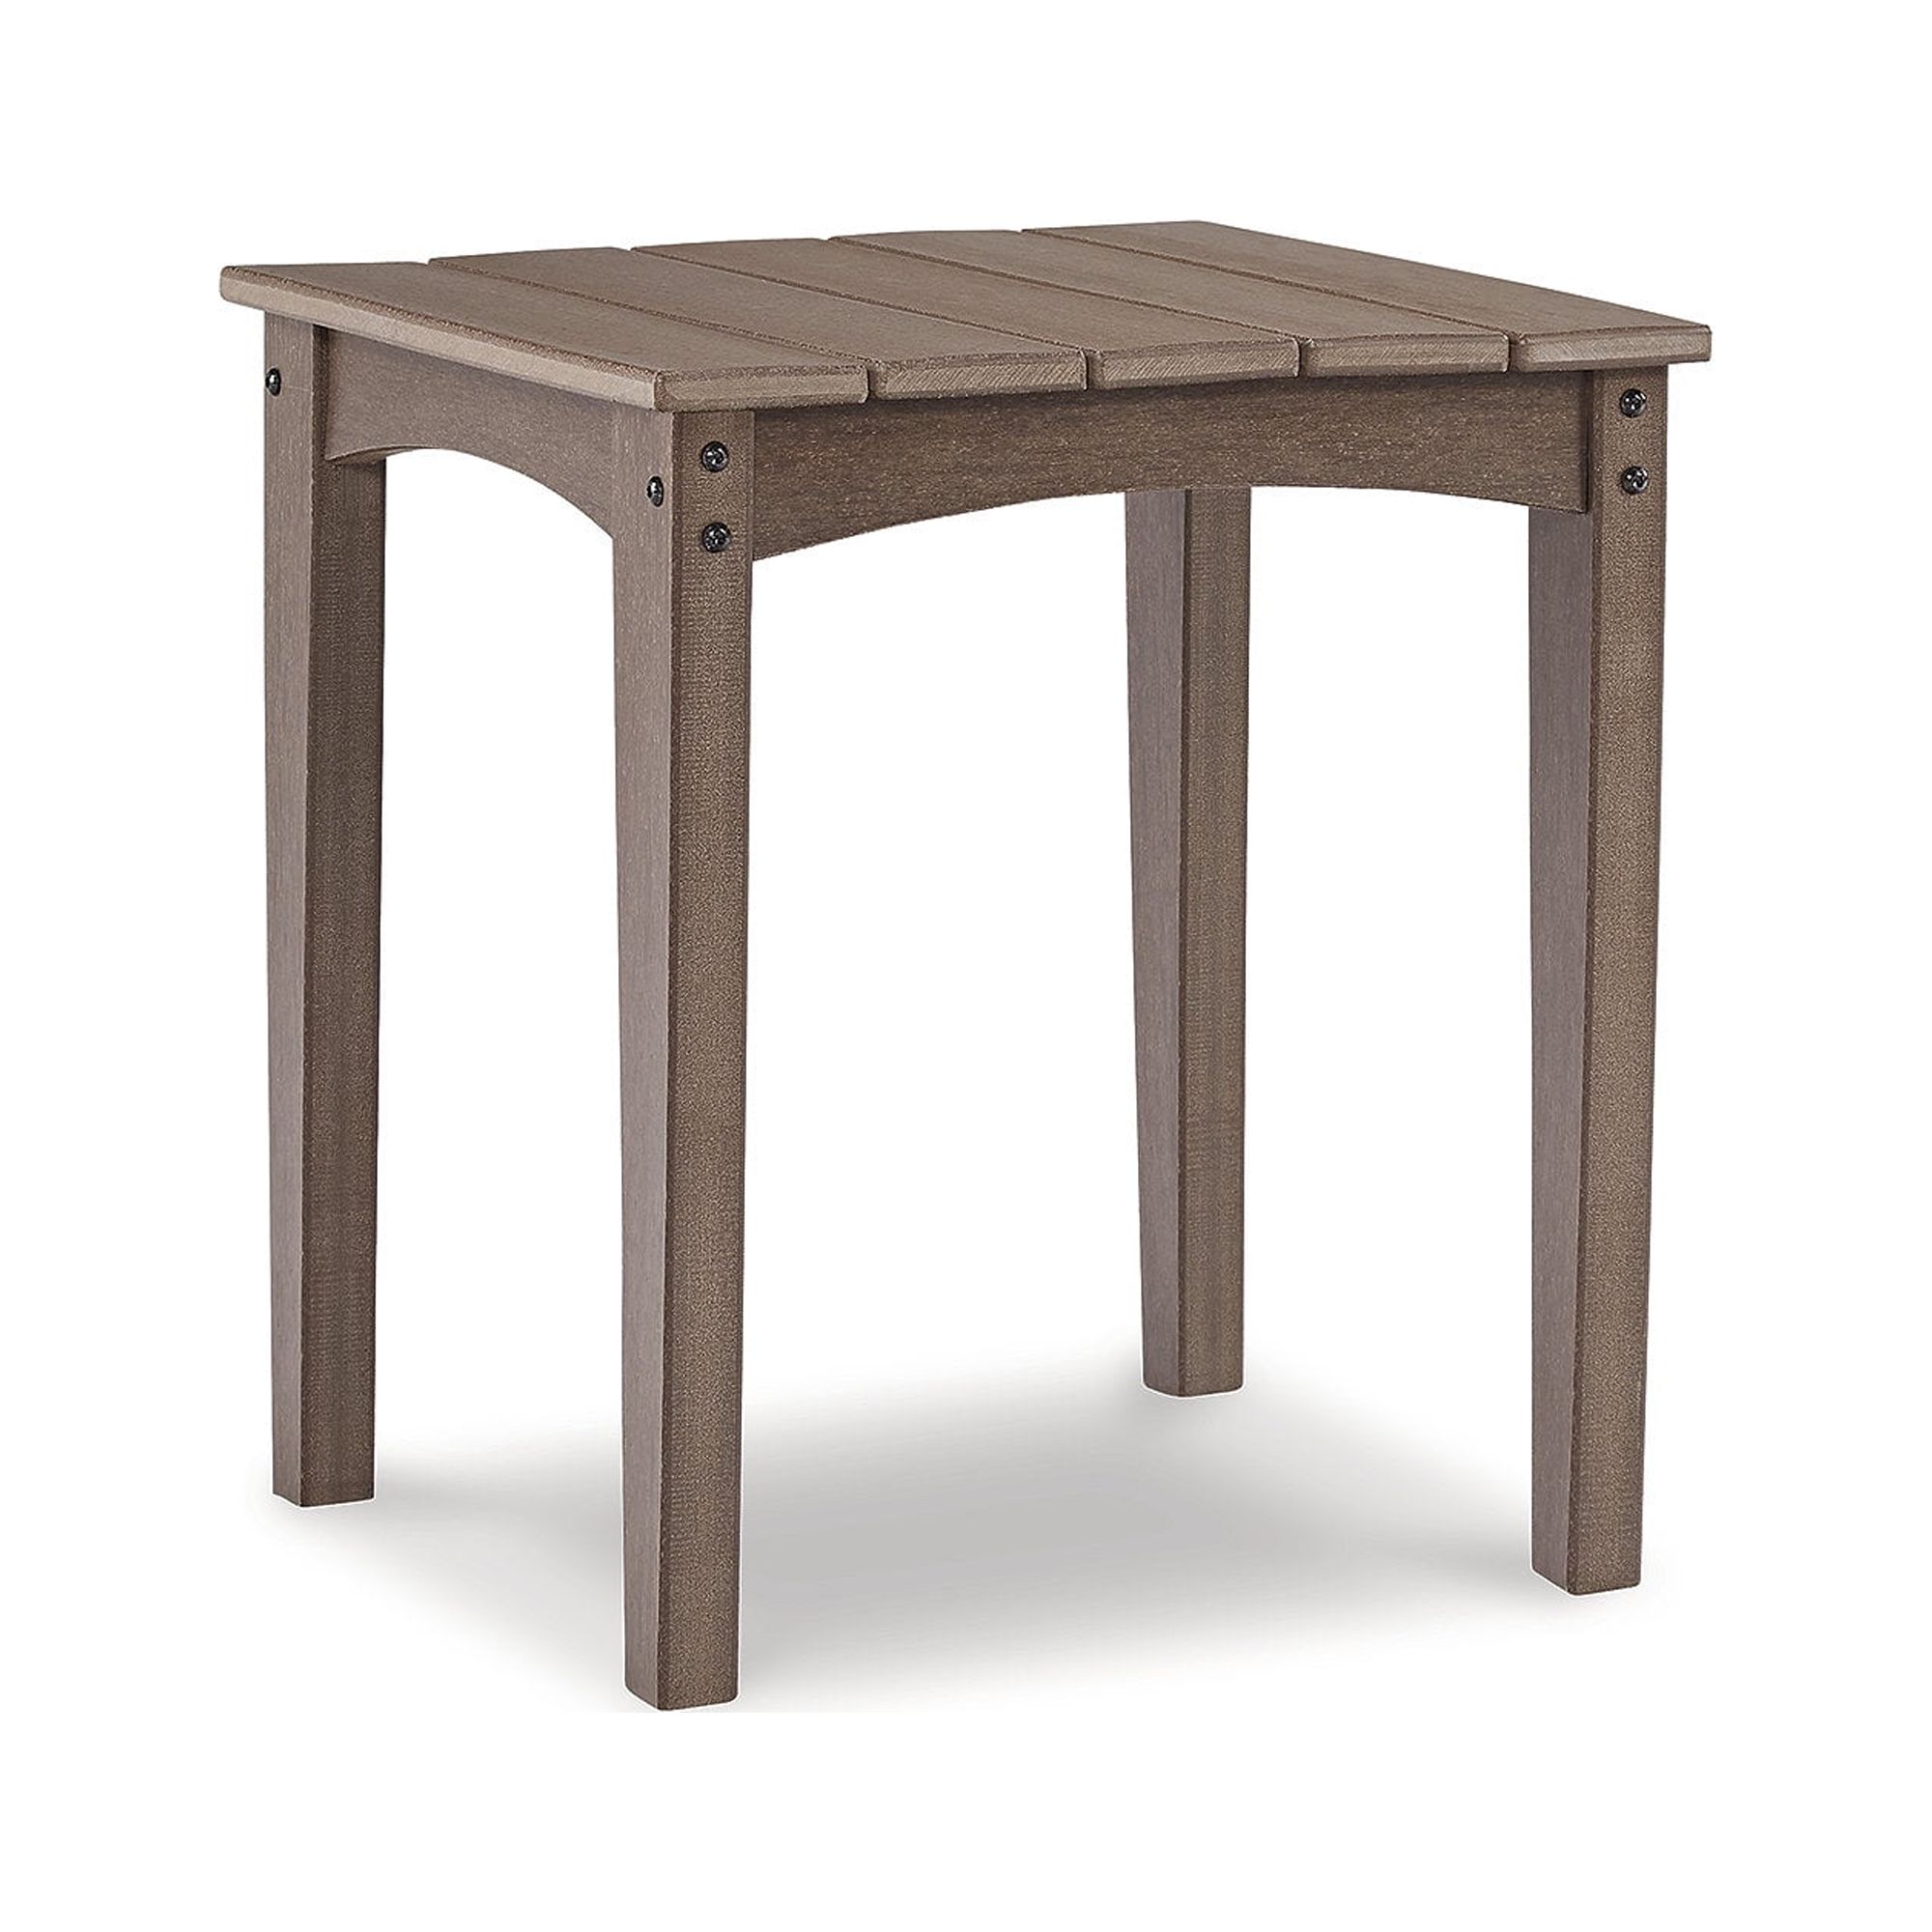 Signature Design by Ashley Casual Emmeline Outdoor HDPE Patio End Table, Brown - image 1 of 5